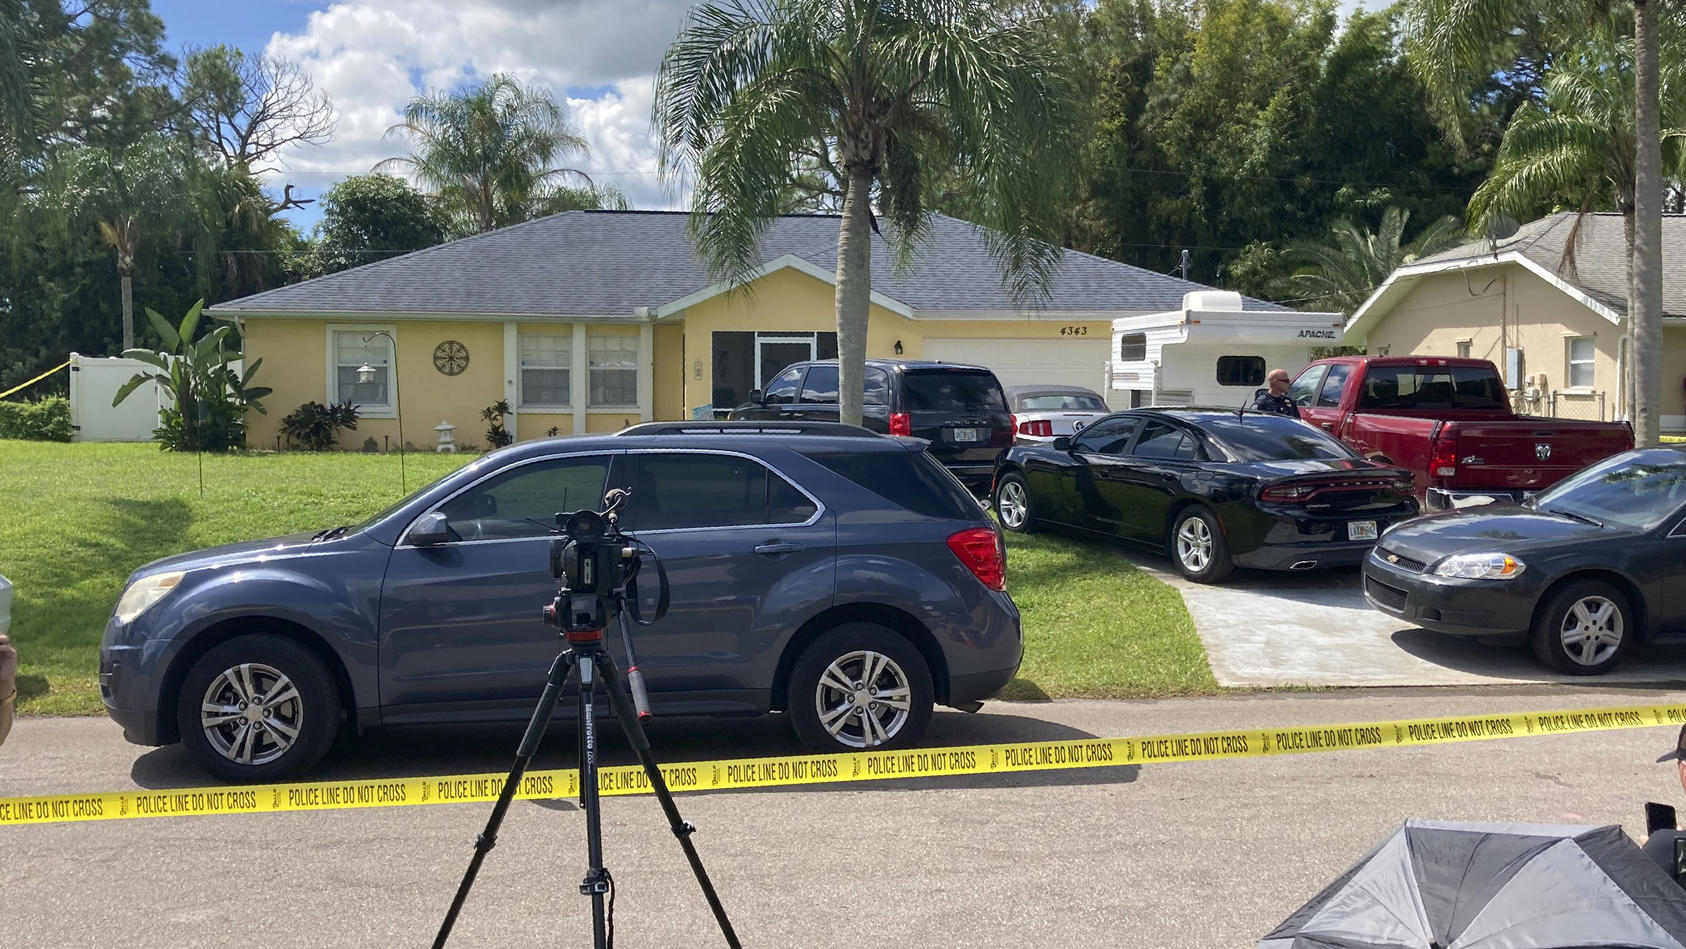 Law enforcement officials swarmed a home in North Port, Fla. on Monday, Sept. 20, 2021, in the disappearance of Gabby Petito, whose body was apparently discovered over the weekend at a Wyoming national park. The officers served a search warrant at th